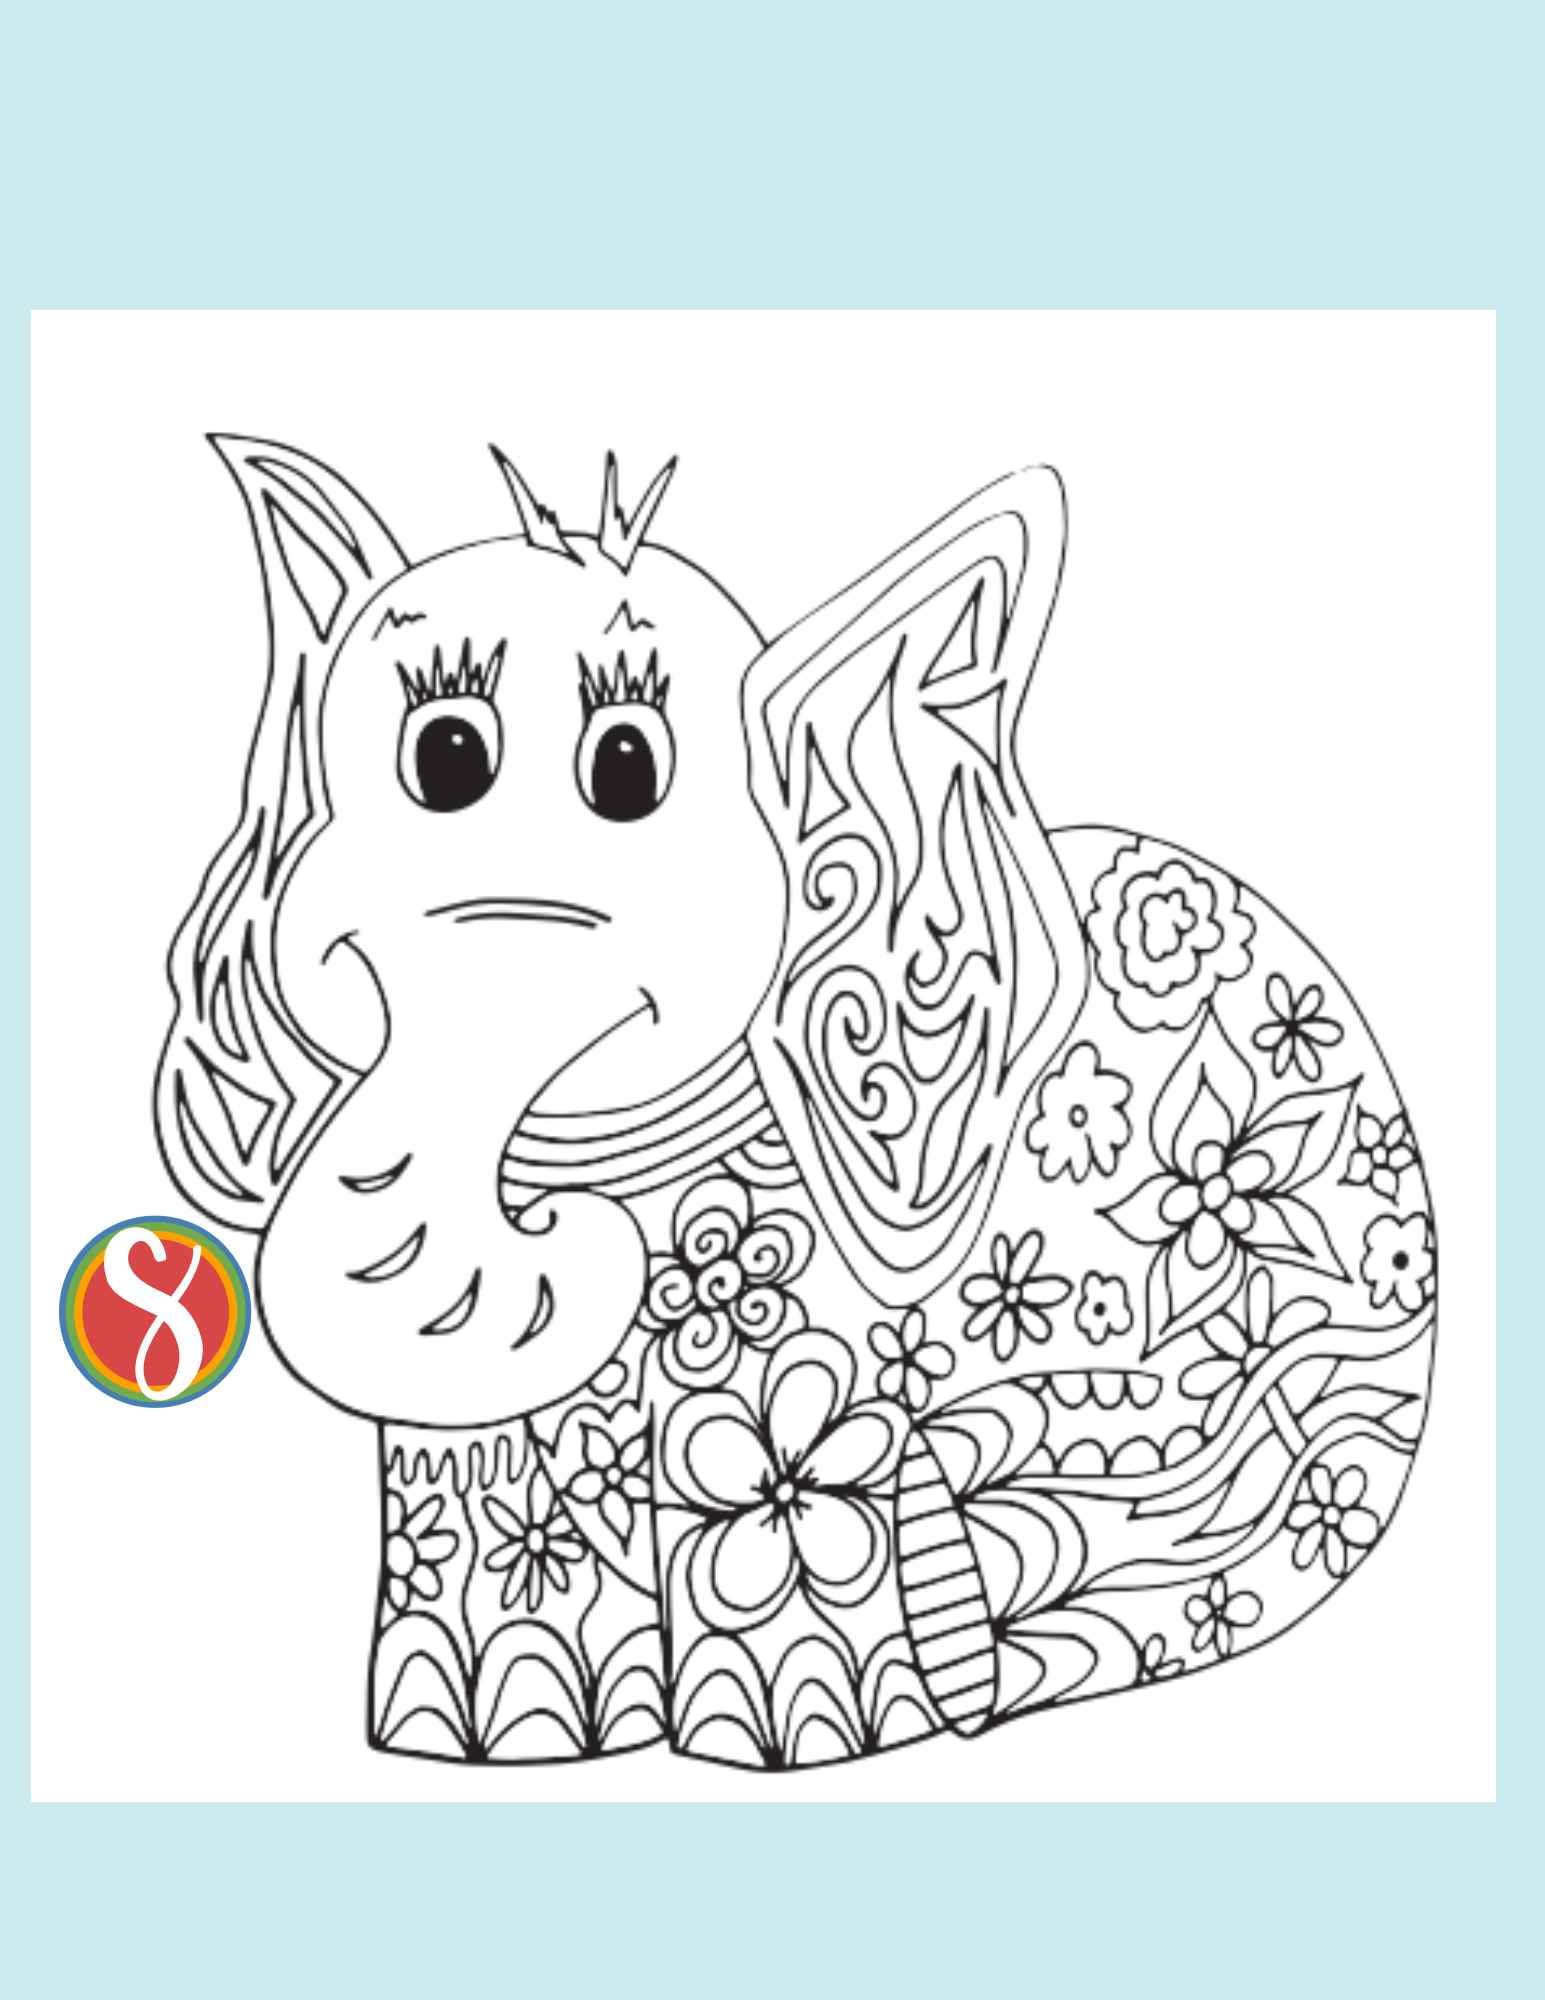 big elephant coloring page with an elephant full of flowers